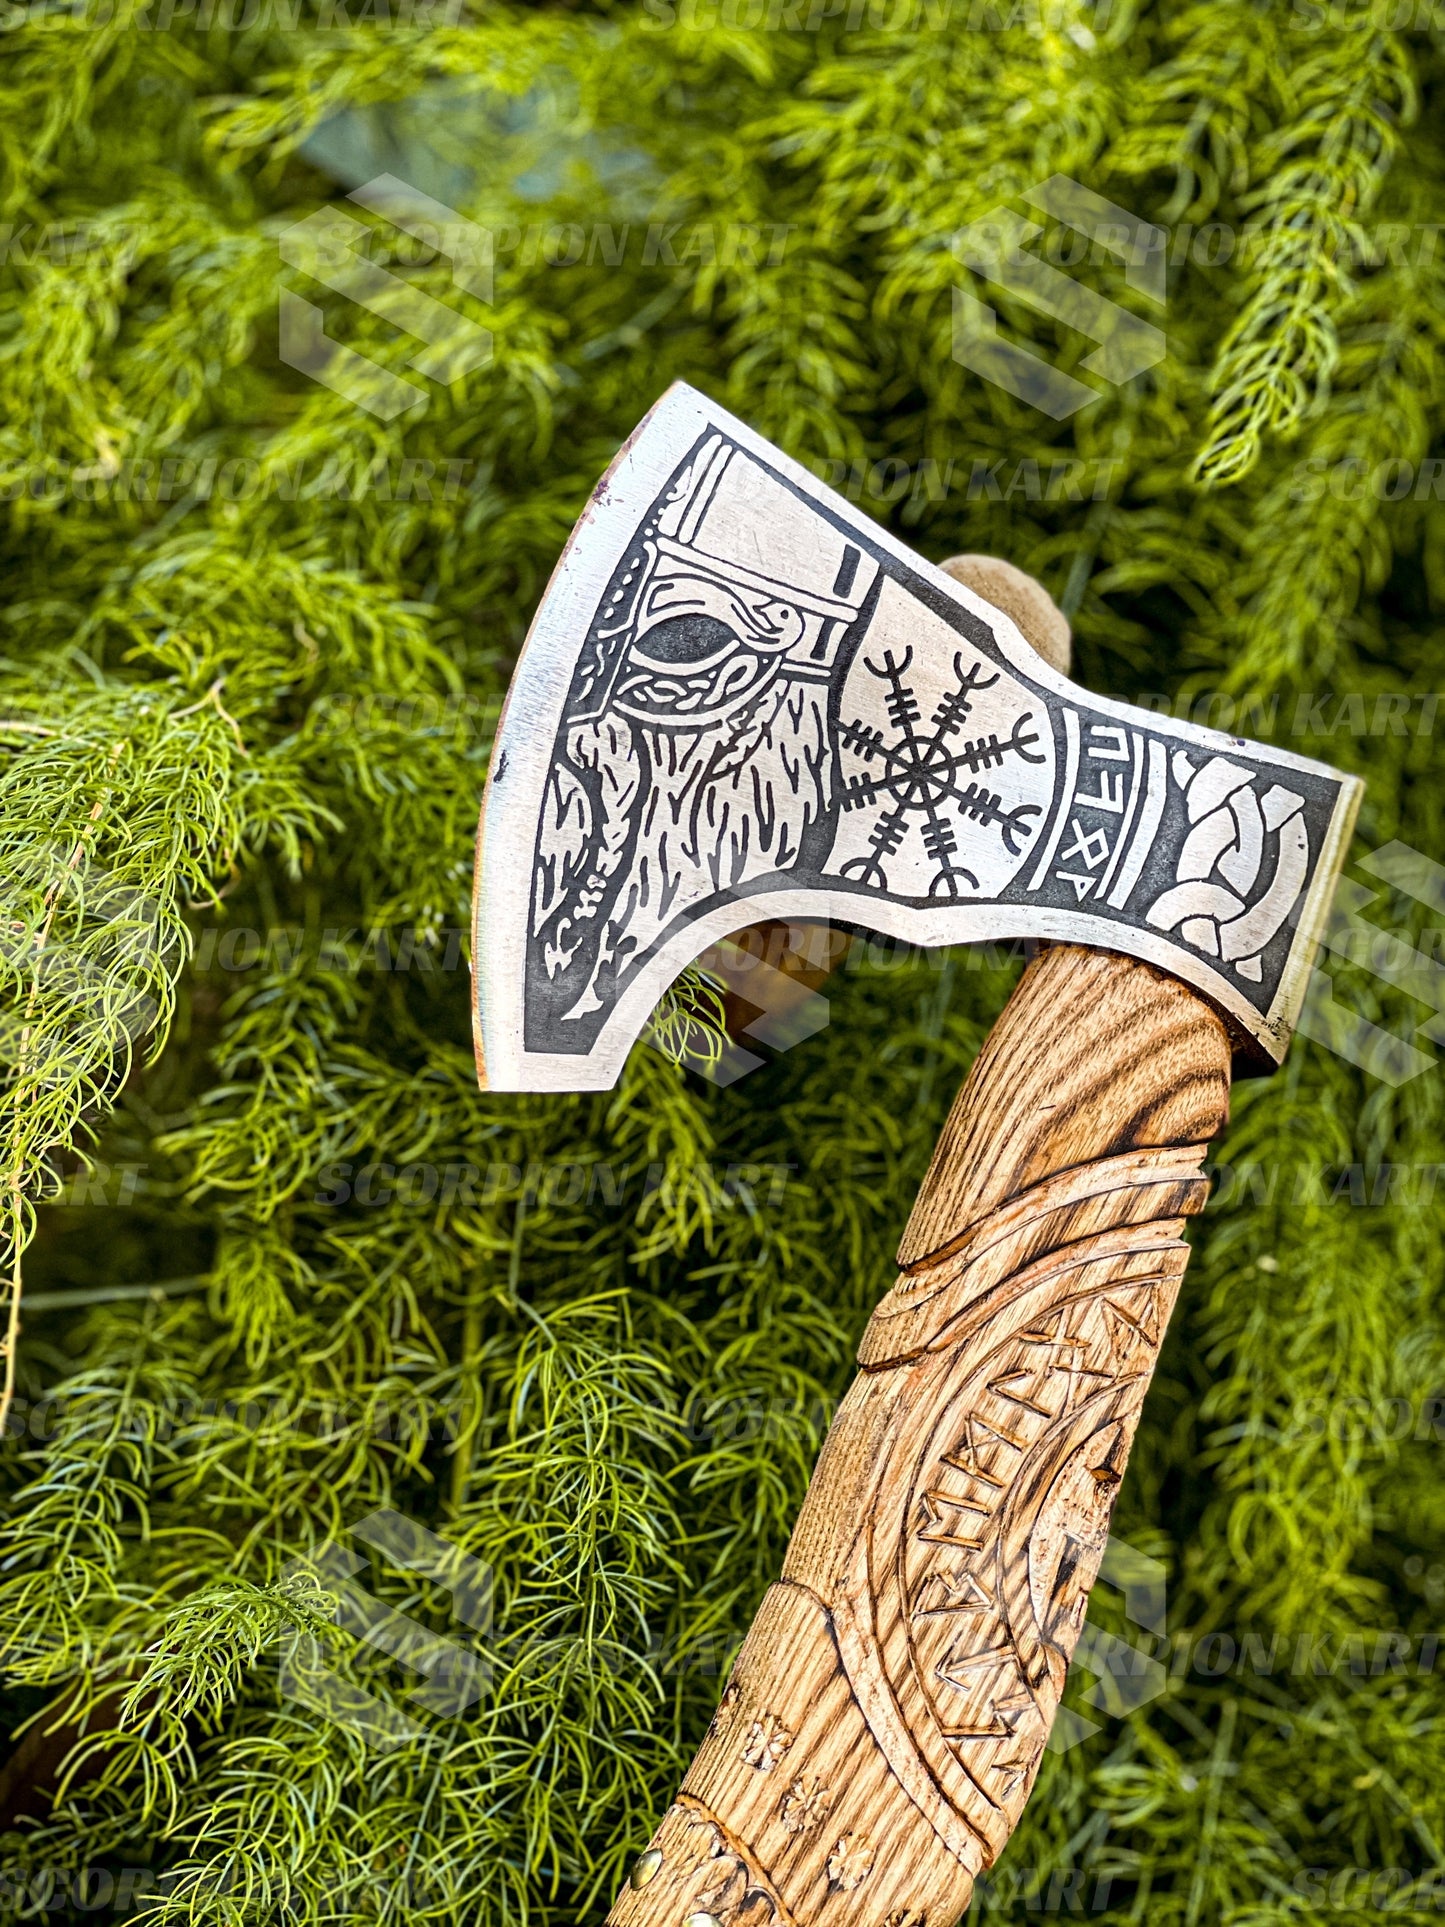 Custom Engraved Vegvisir Viking Axe: Unique Gift for Wedding Anniversary, Birthday | Bushcraft Throwing Odin Axe for Men and Women - Premium best Happy Valentine Day gift from SCORPION KART - Just $99.50! Shop now at SCORPION KART